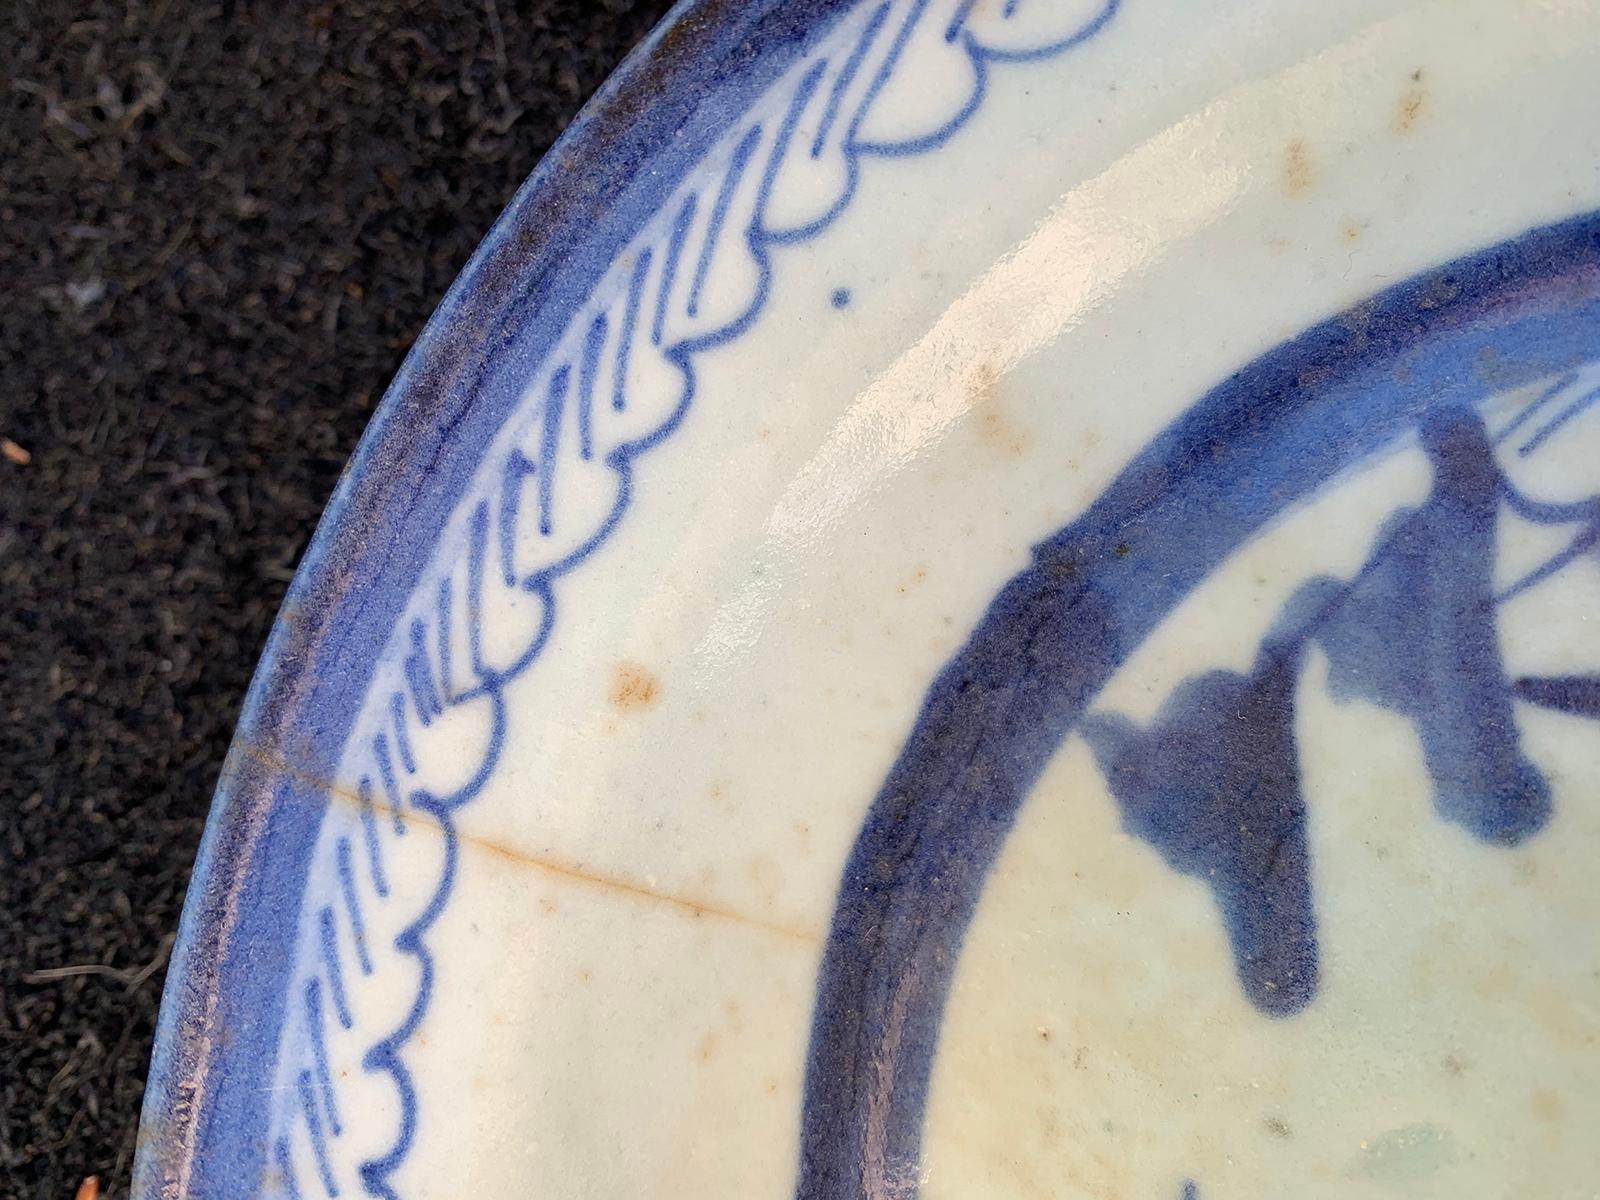 19th Century Chinese Export Canton Ware Blue & White Porcelain Plate, Unmarked For Sale 4